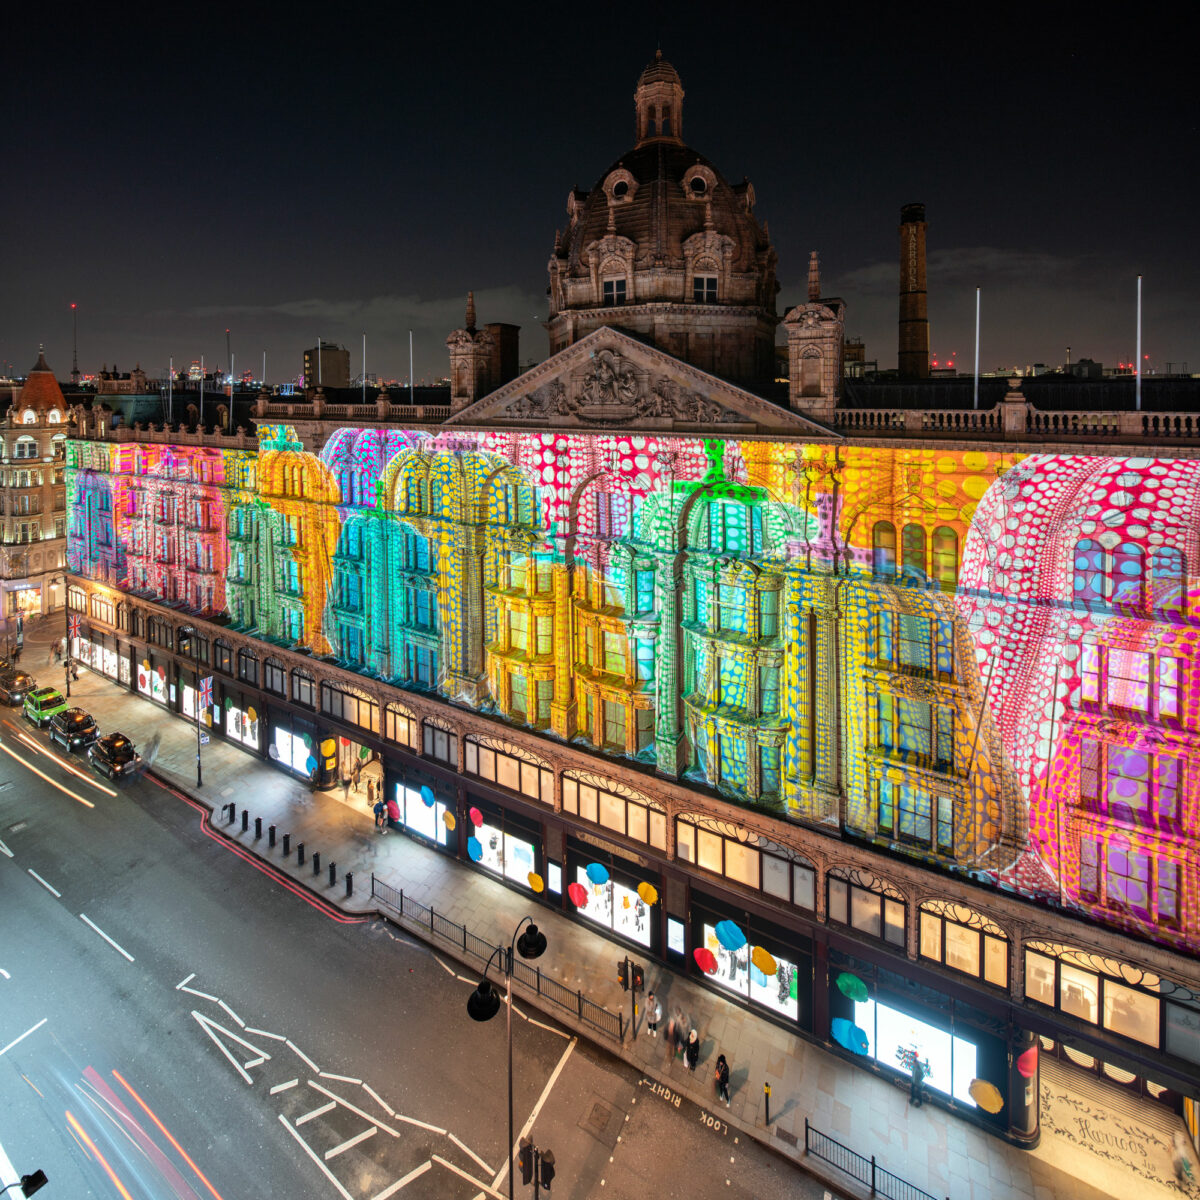 Louis Vuitton has celebrated a collaboration with Yayoi Kusama by projecting the artist's designs onto the façade of Harrods - a media first.